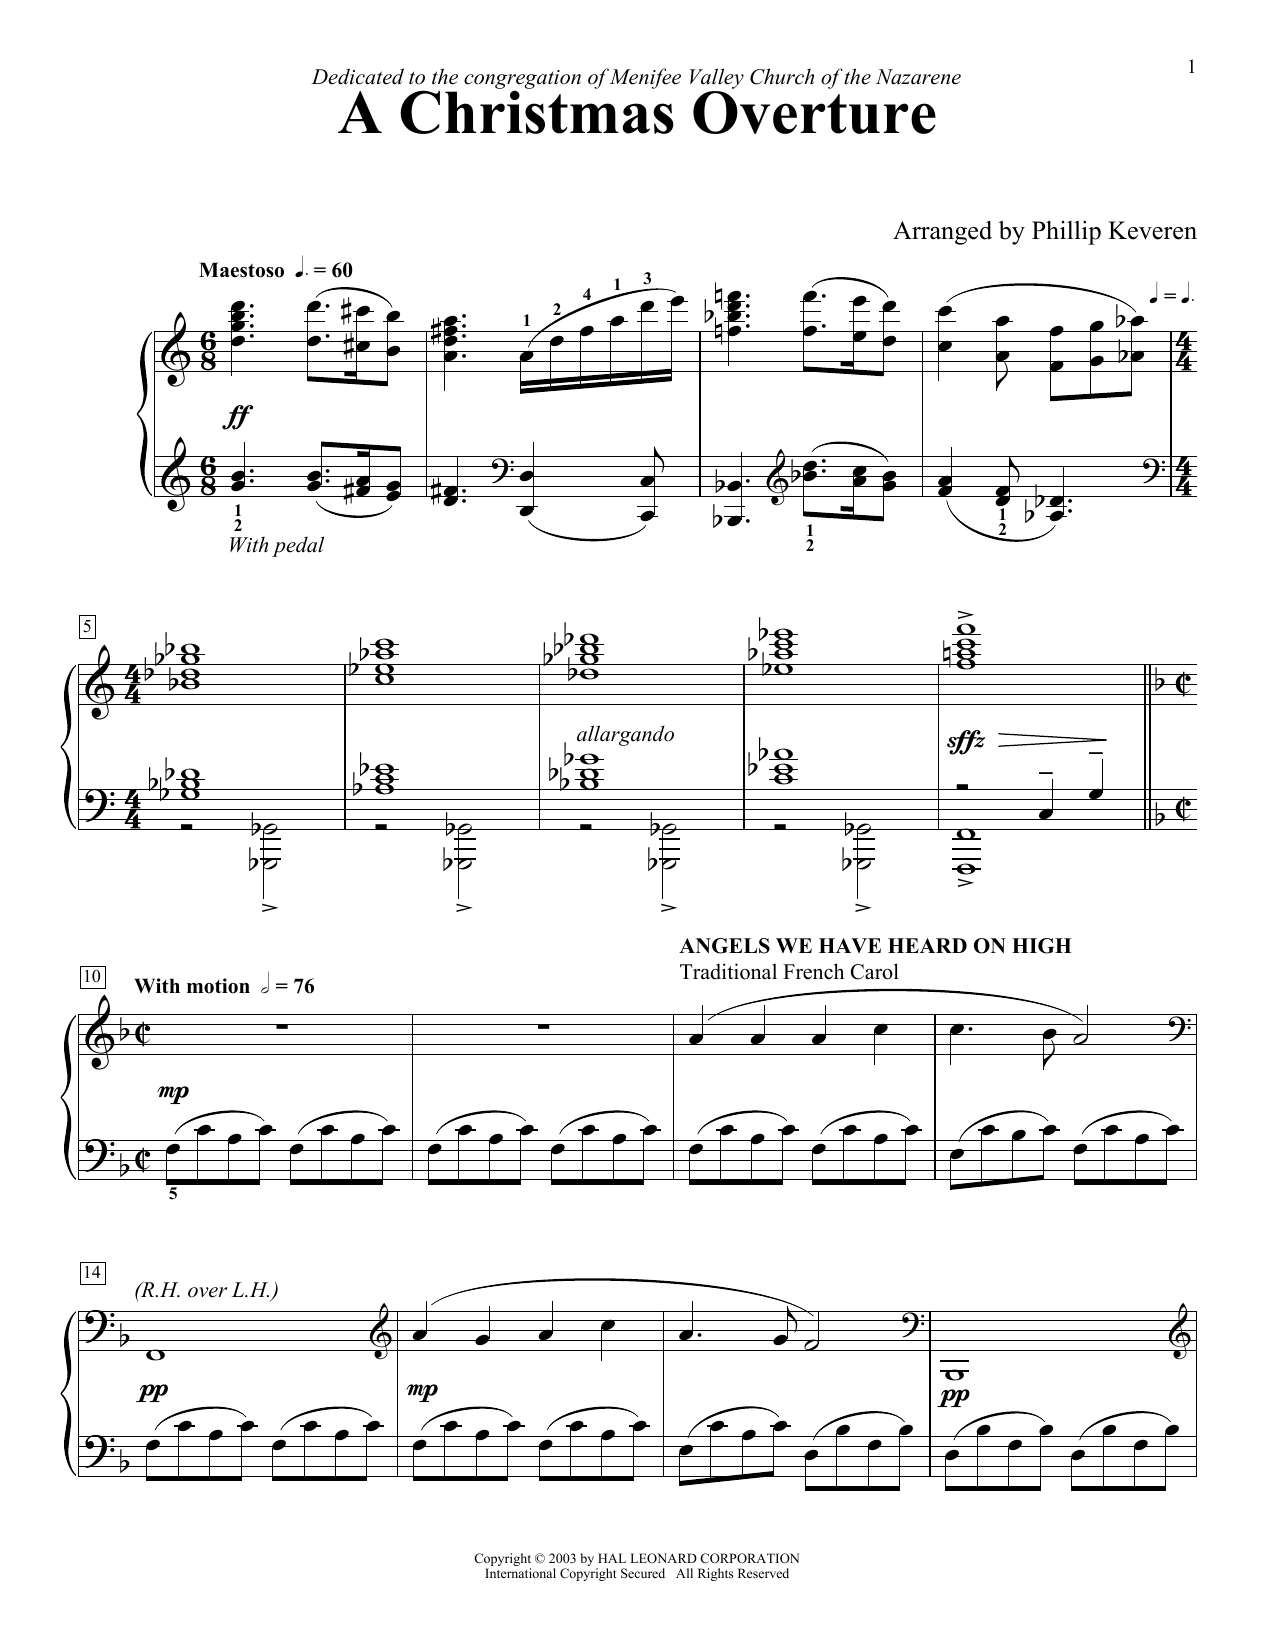 Traditional French Carol A Christmas Overture (arr. Phillip Keveren) sheet music notes printable PDF score